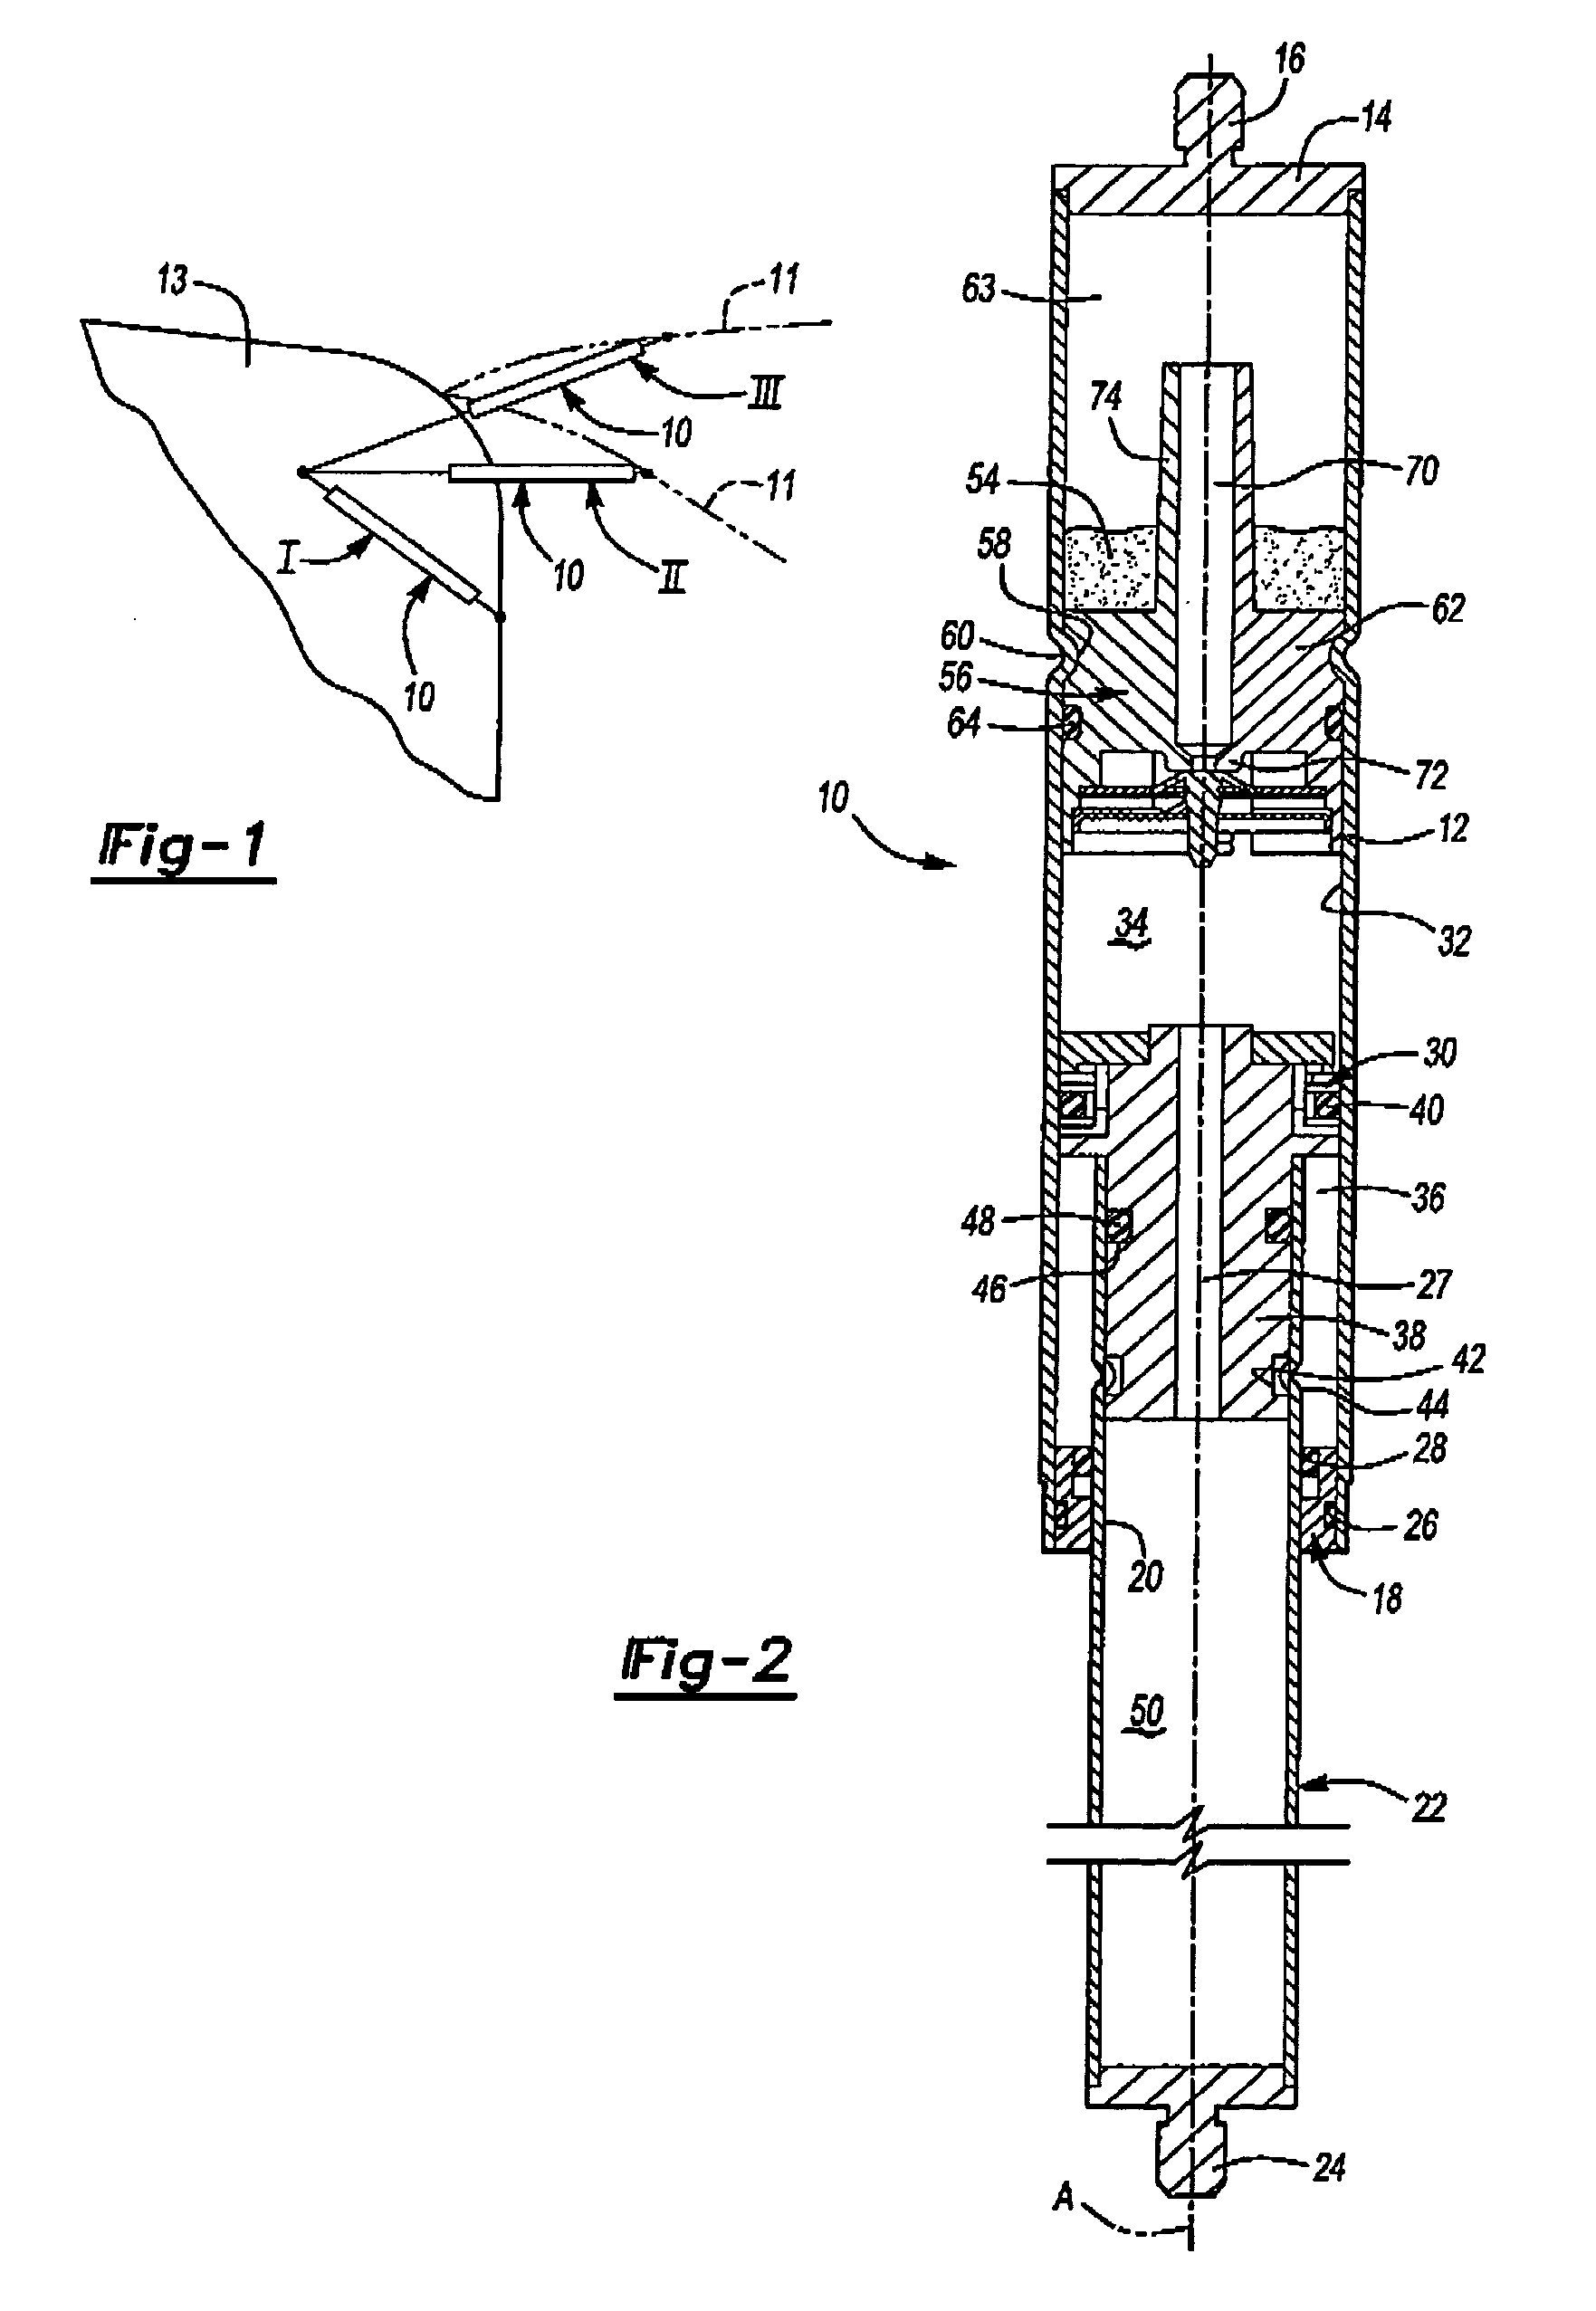 Temperature responsive valve assembly for a pneumatic spring